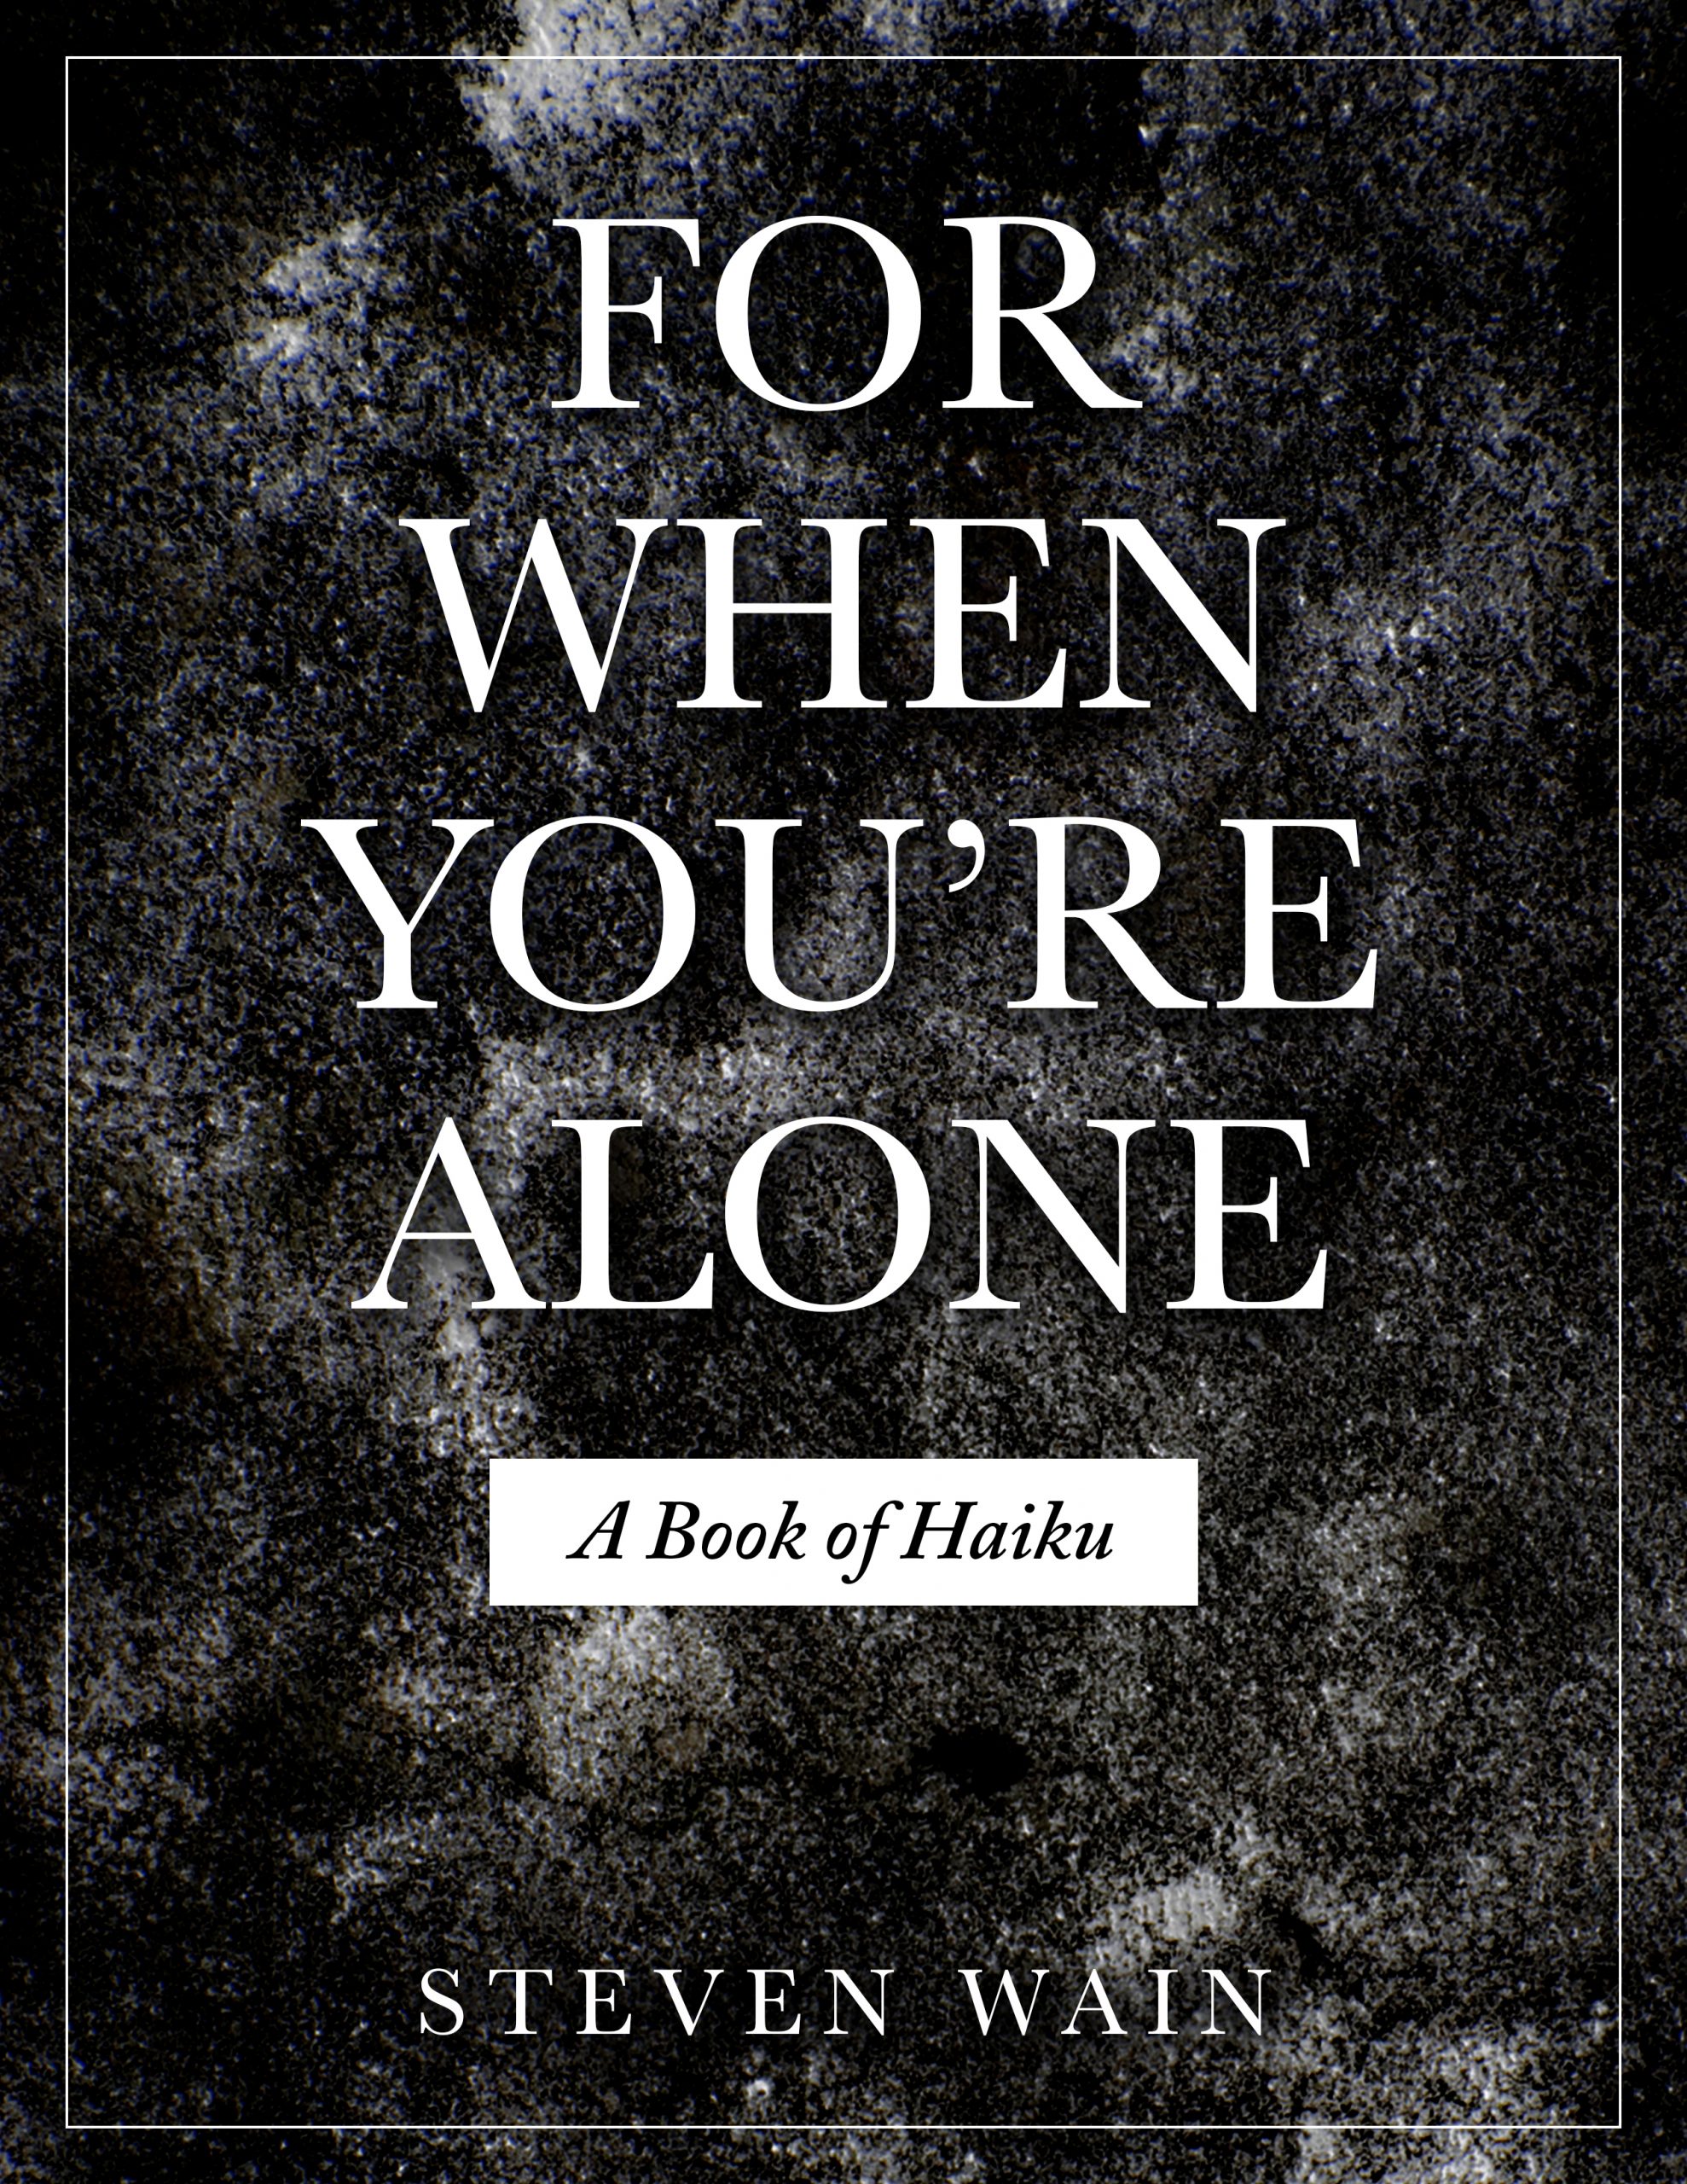 For When You're Alone book cover